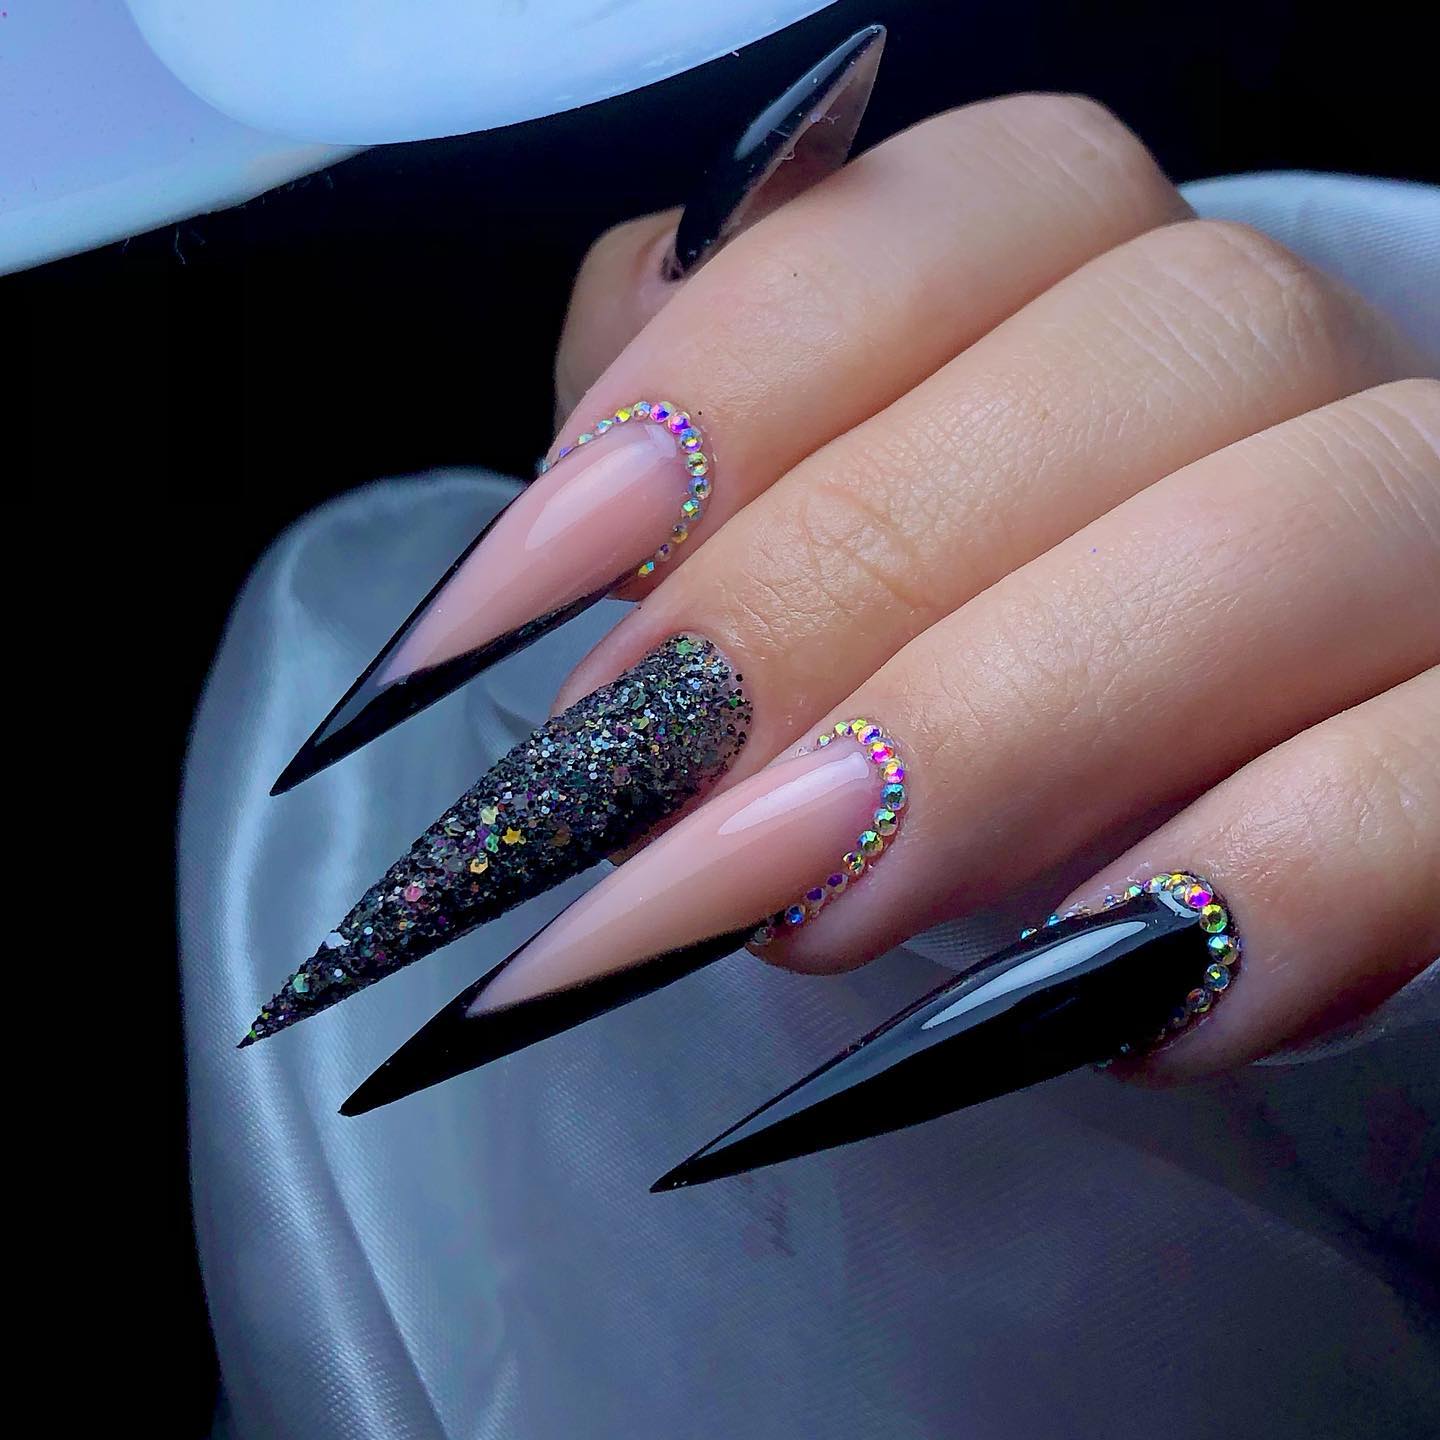 Long Acrylic Stiletto Black Nails with Glitter and Rhinestones